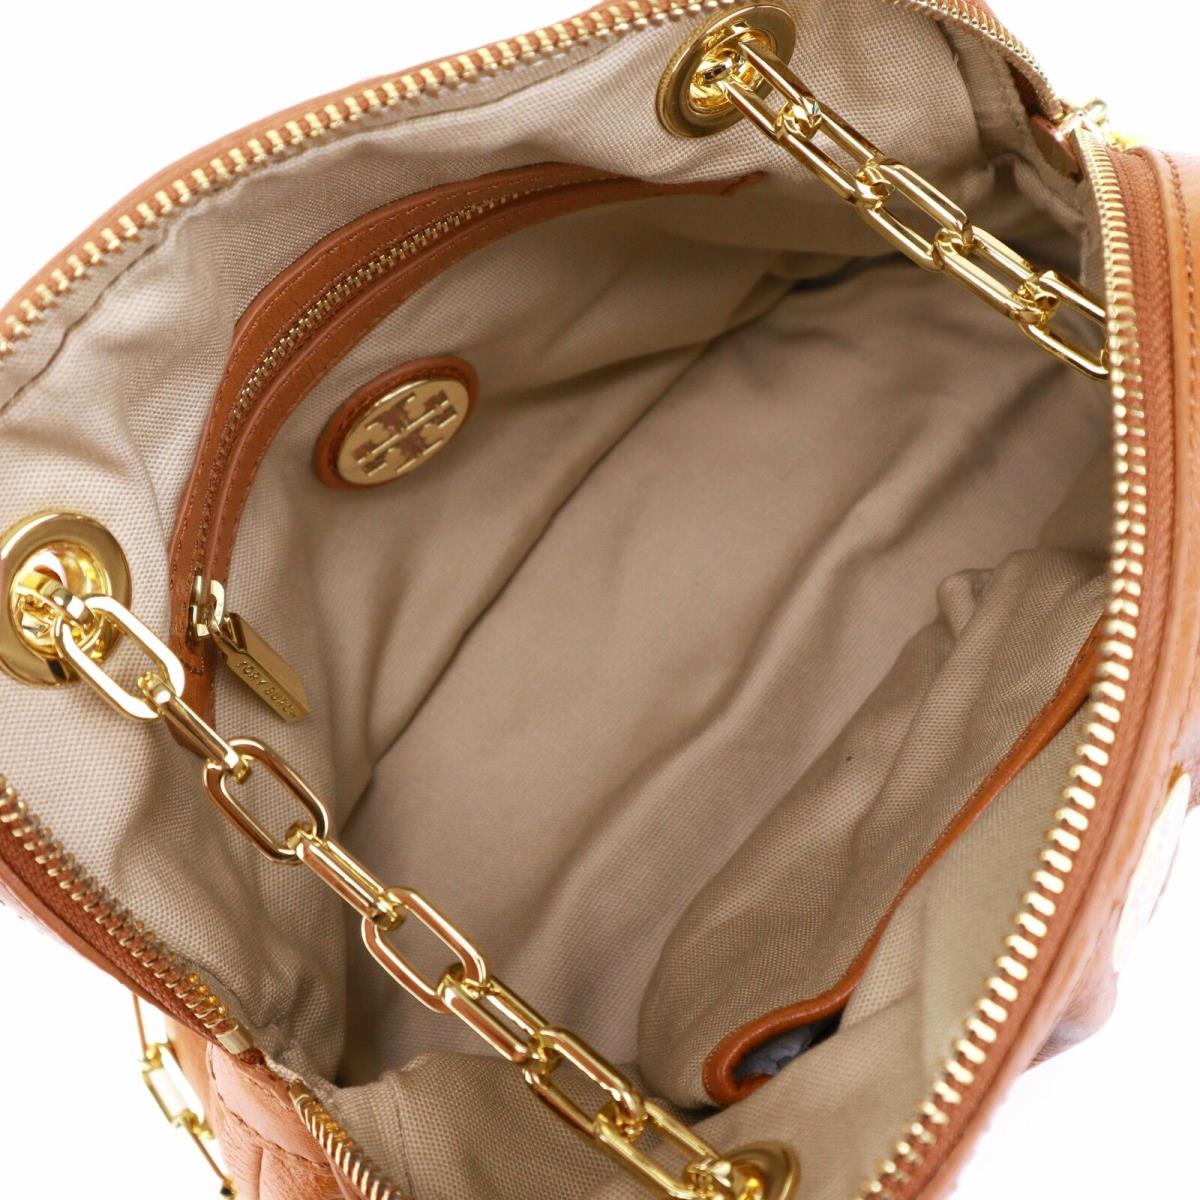 Tory Burch Crinkle Leather 2 Way Crossbody Bag w Chain in Royal Tan |  887712843671 - Tory Burch bag - Beige Lining, Luggage Exterior, Gold  Handle/Strap | Fash Direct